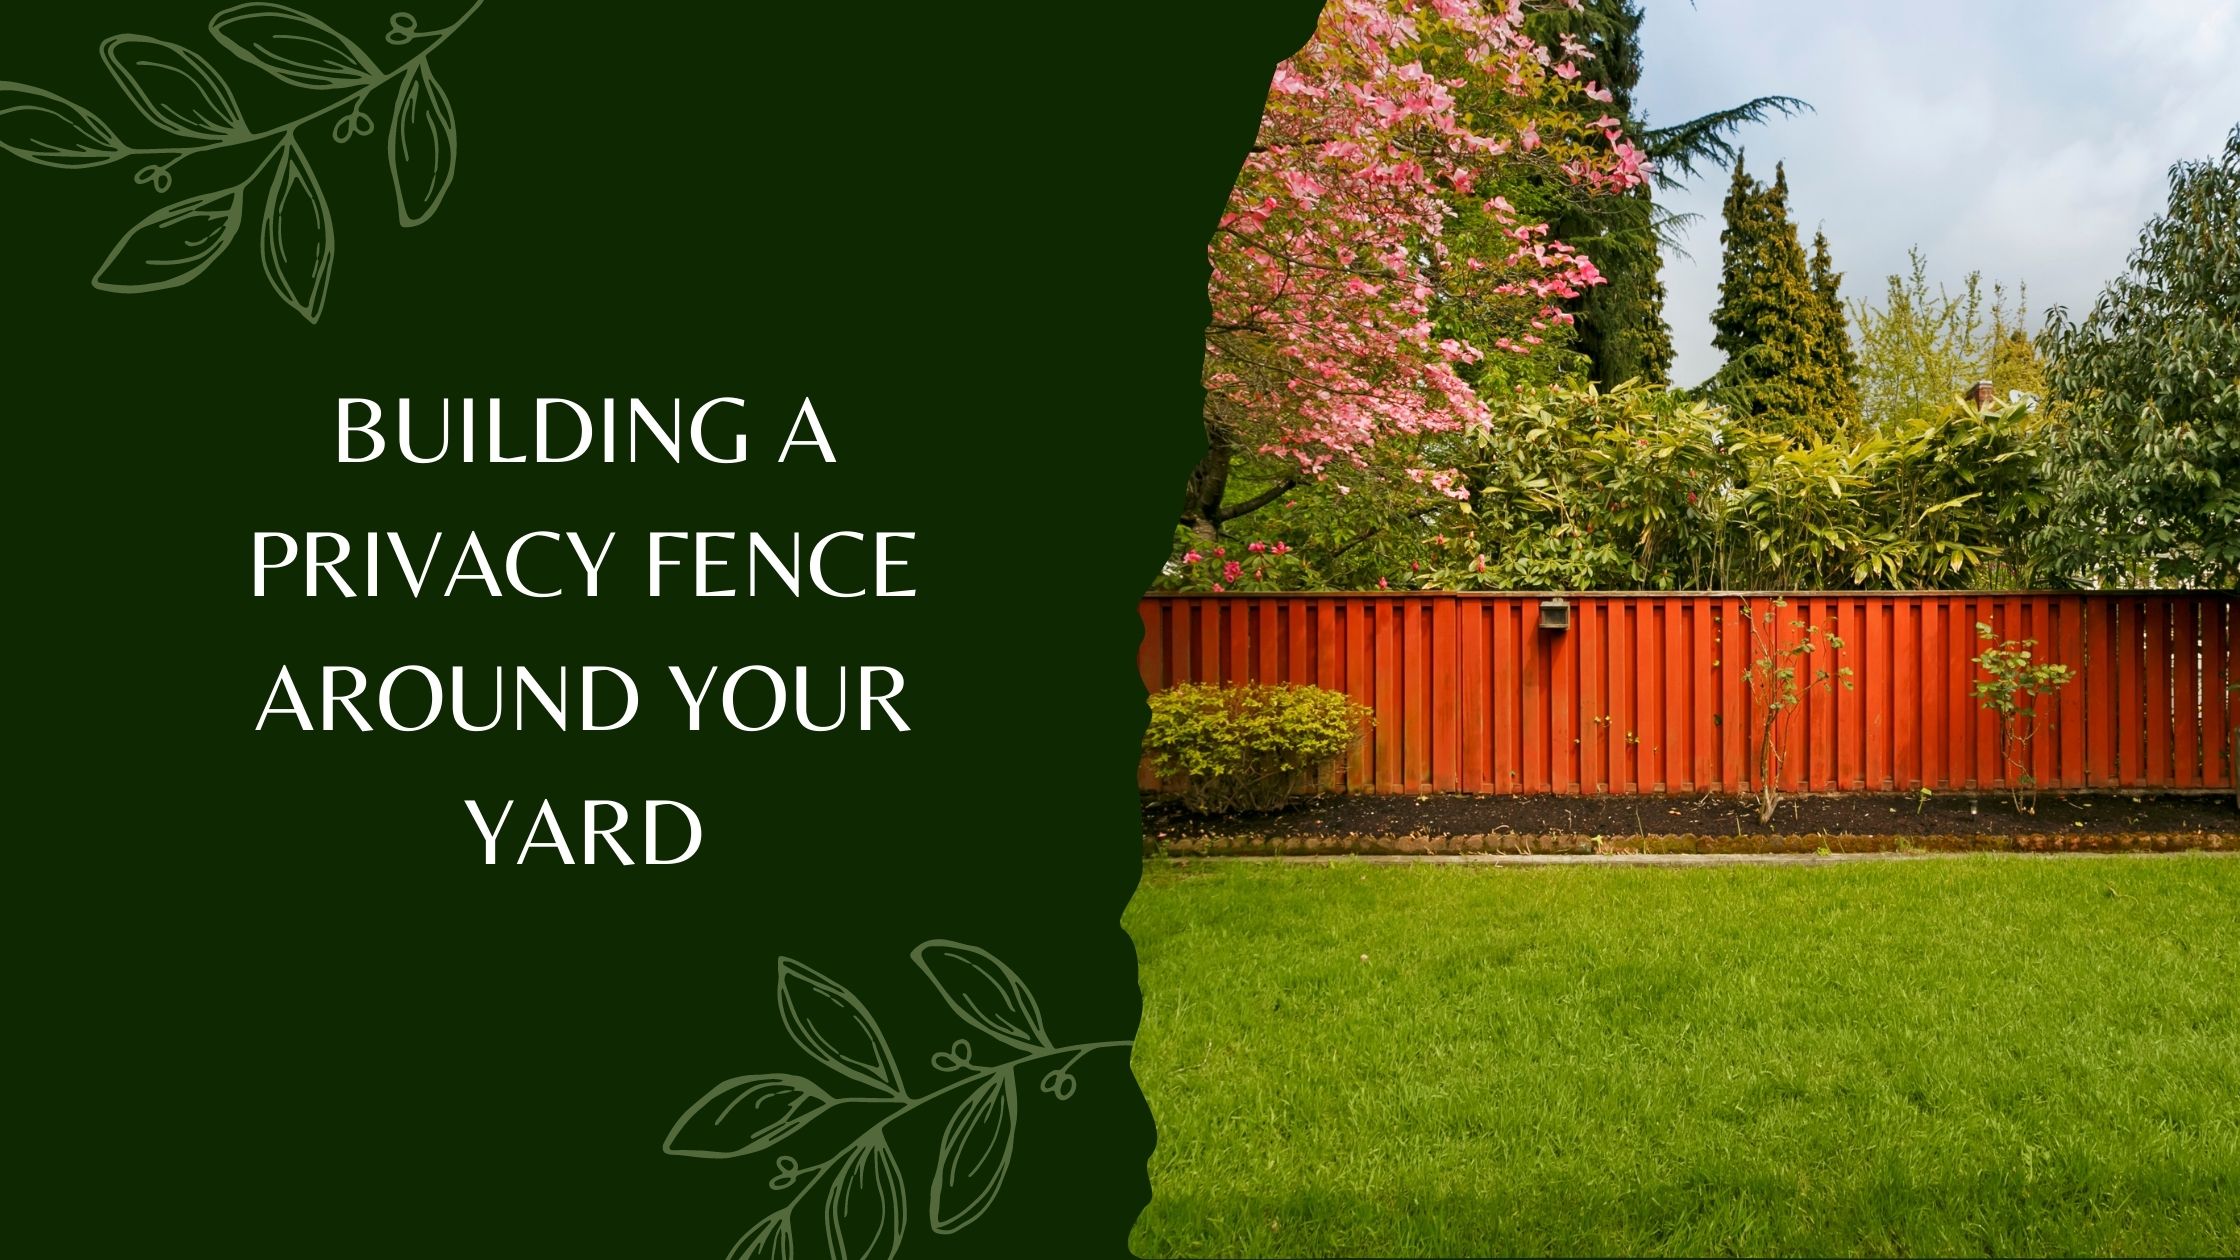 Building a Privacy Fence Around Your Yard